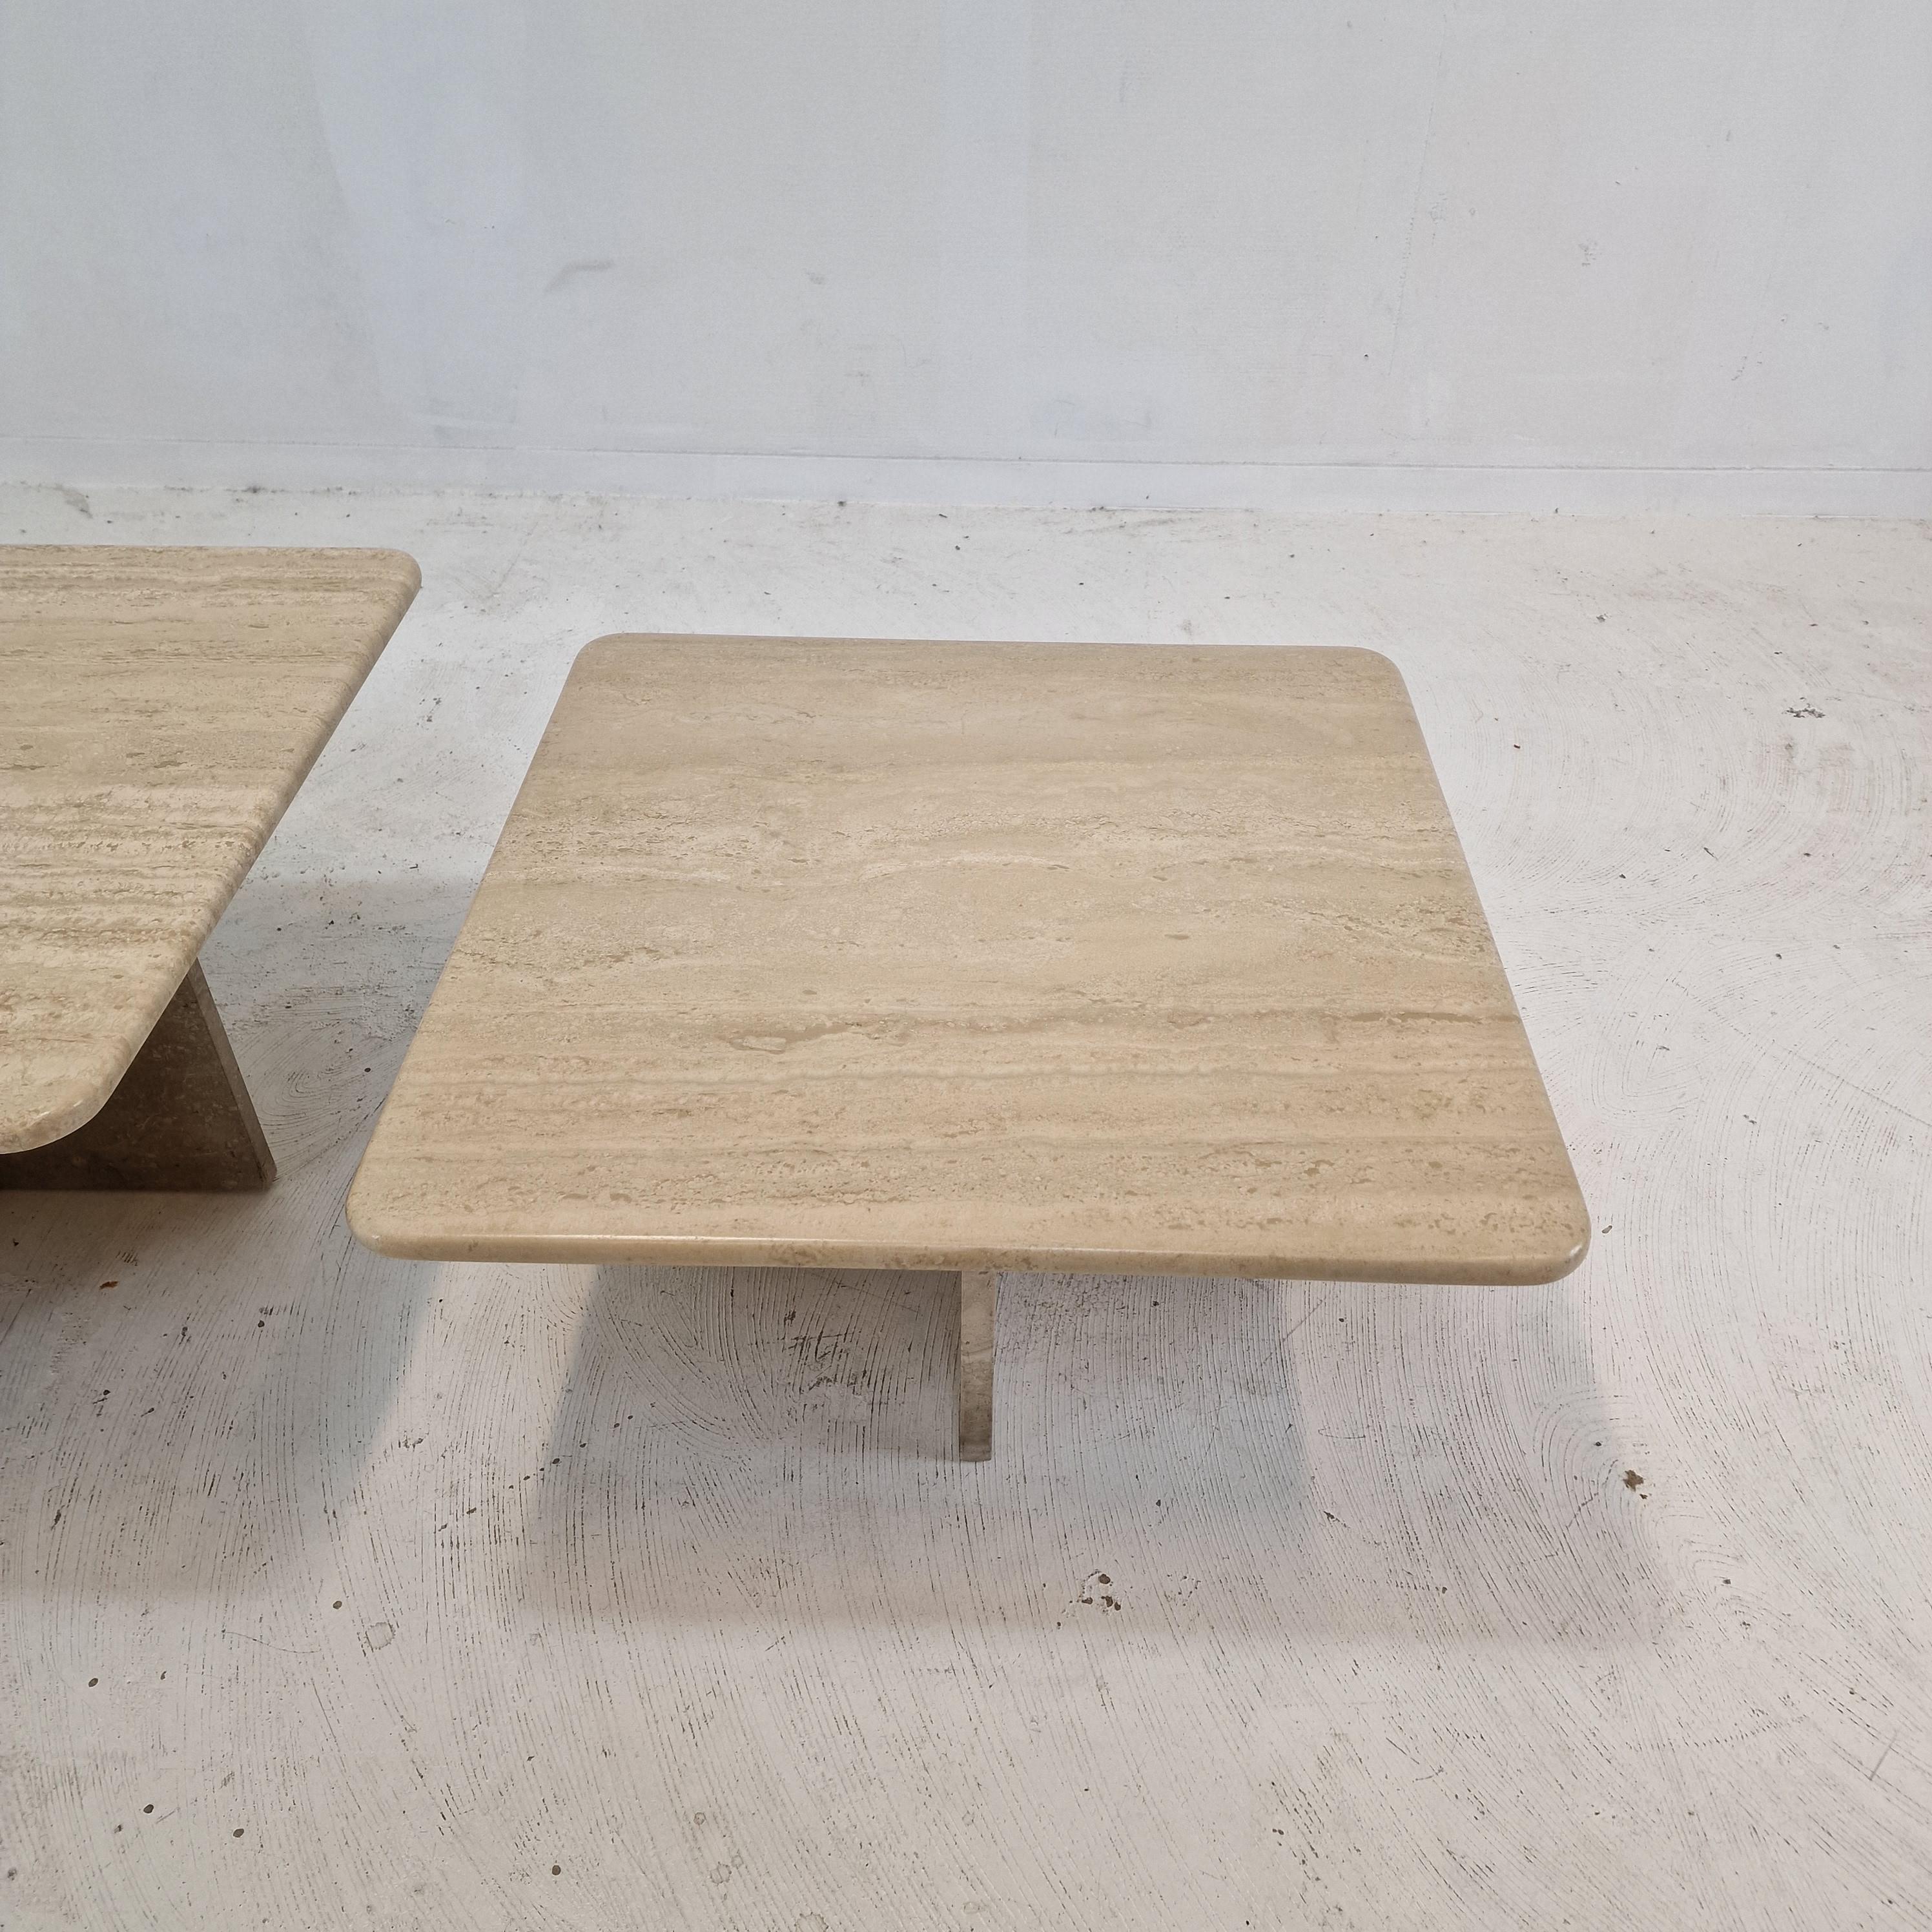 Set of 3 Italian Travertine Coffee or Side Tables, 1990s For Sale 2